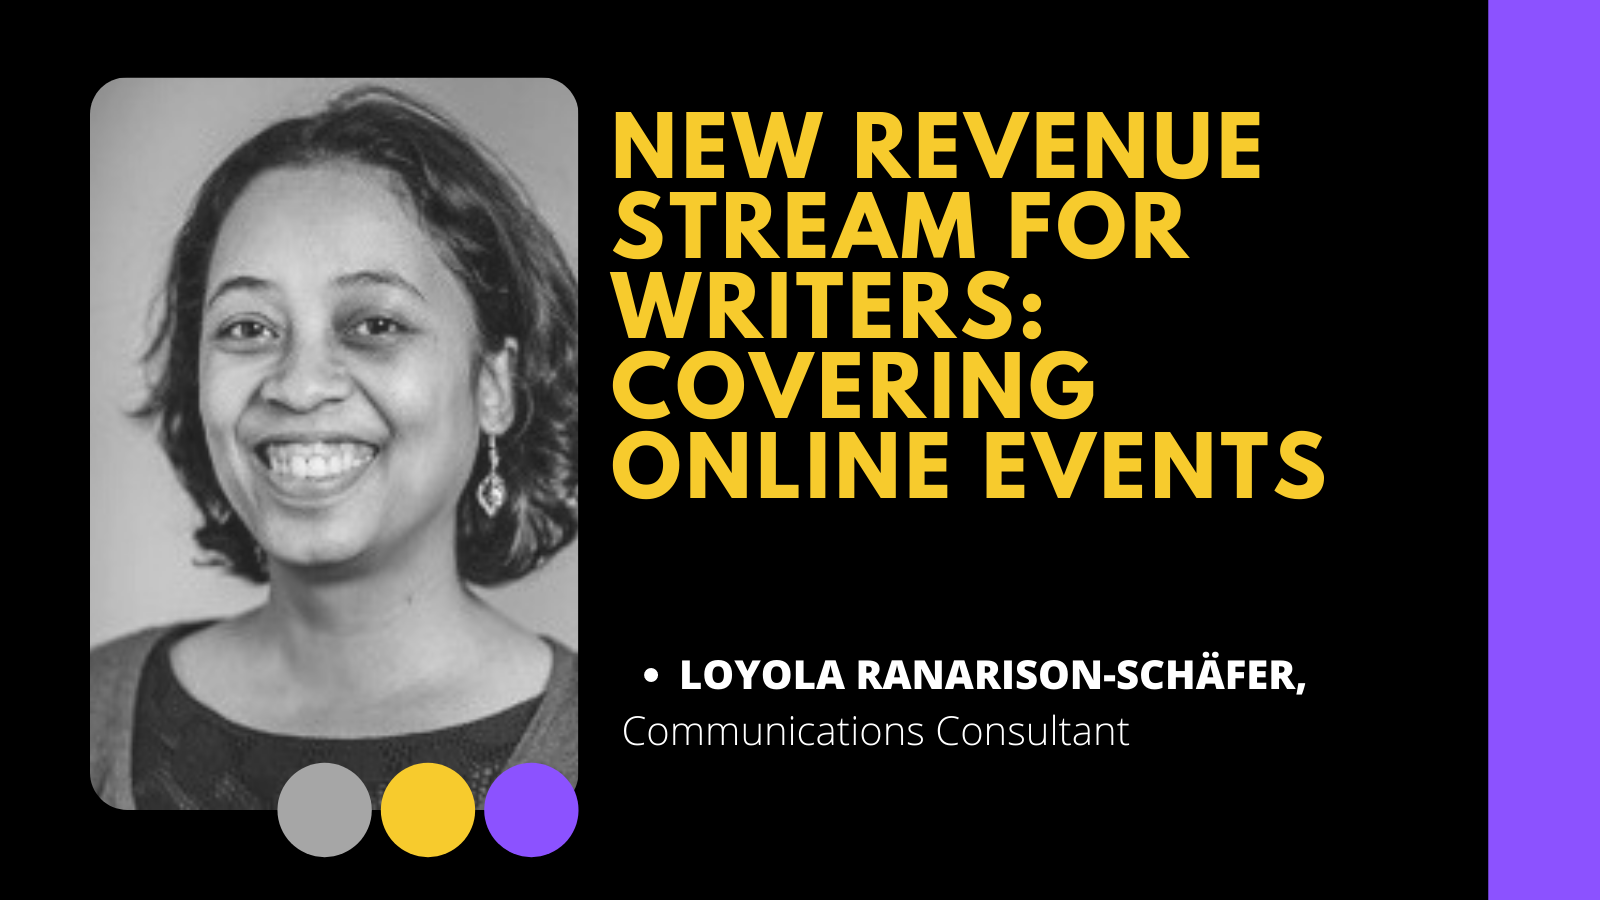 New revenue stream for writers: covering online events with Loyola Ranarison-Schäfer